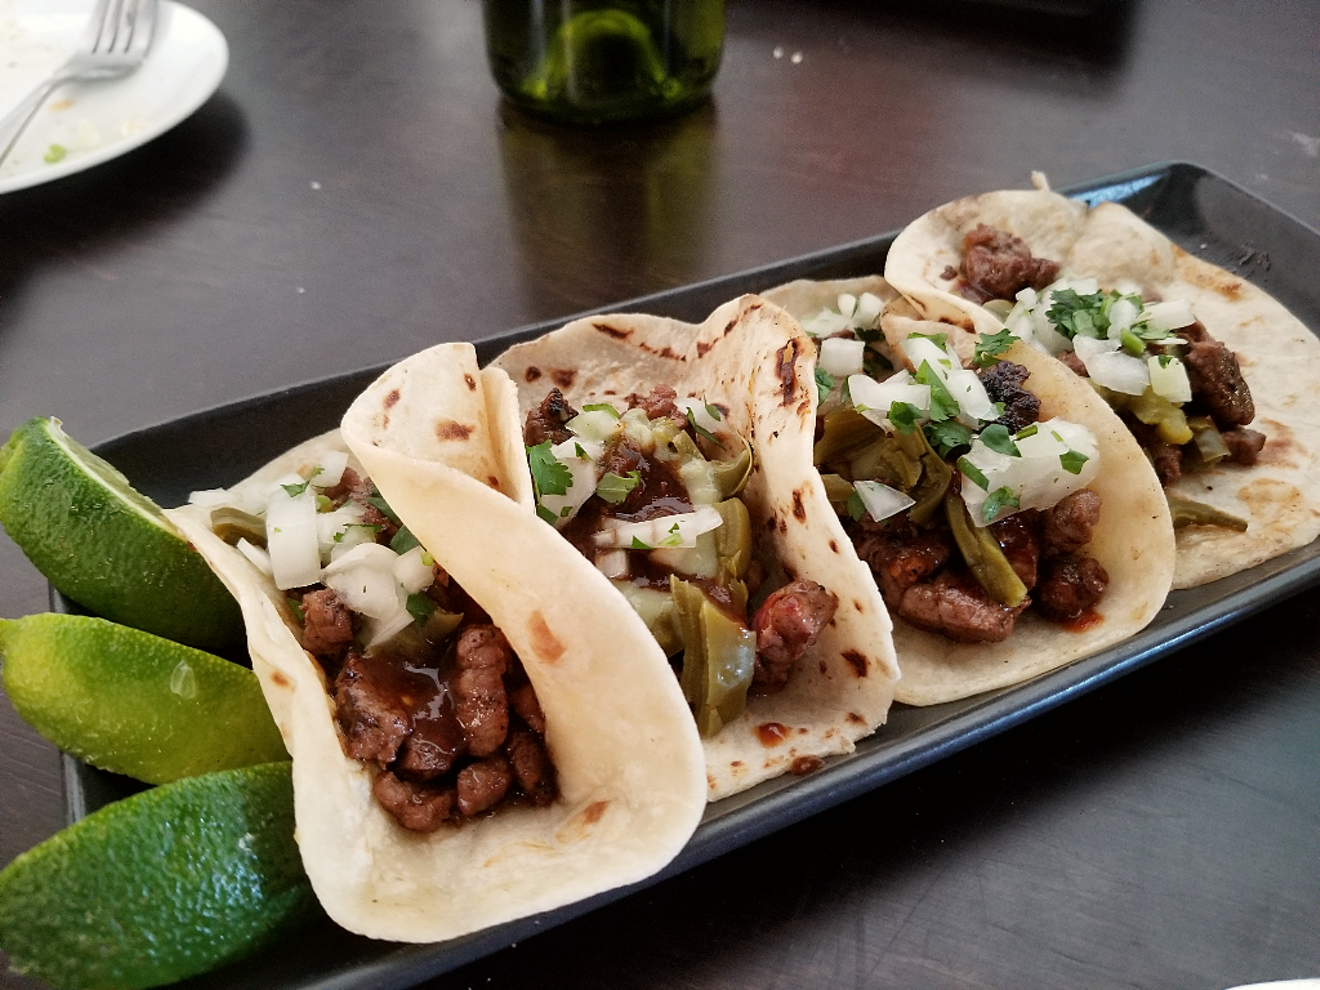 Carne asada tacos with grilled nopalitos at Céntrico in downtown Phoenix.